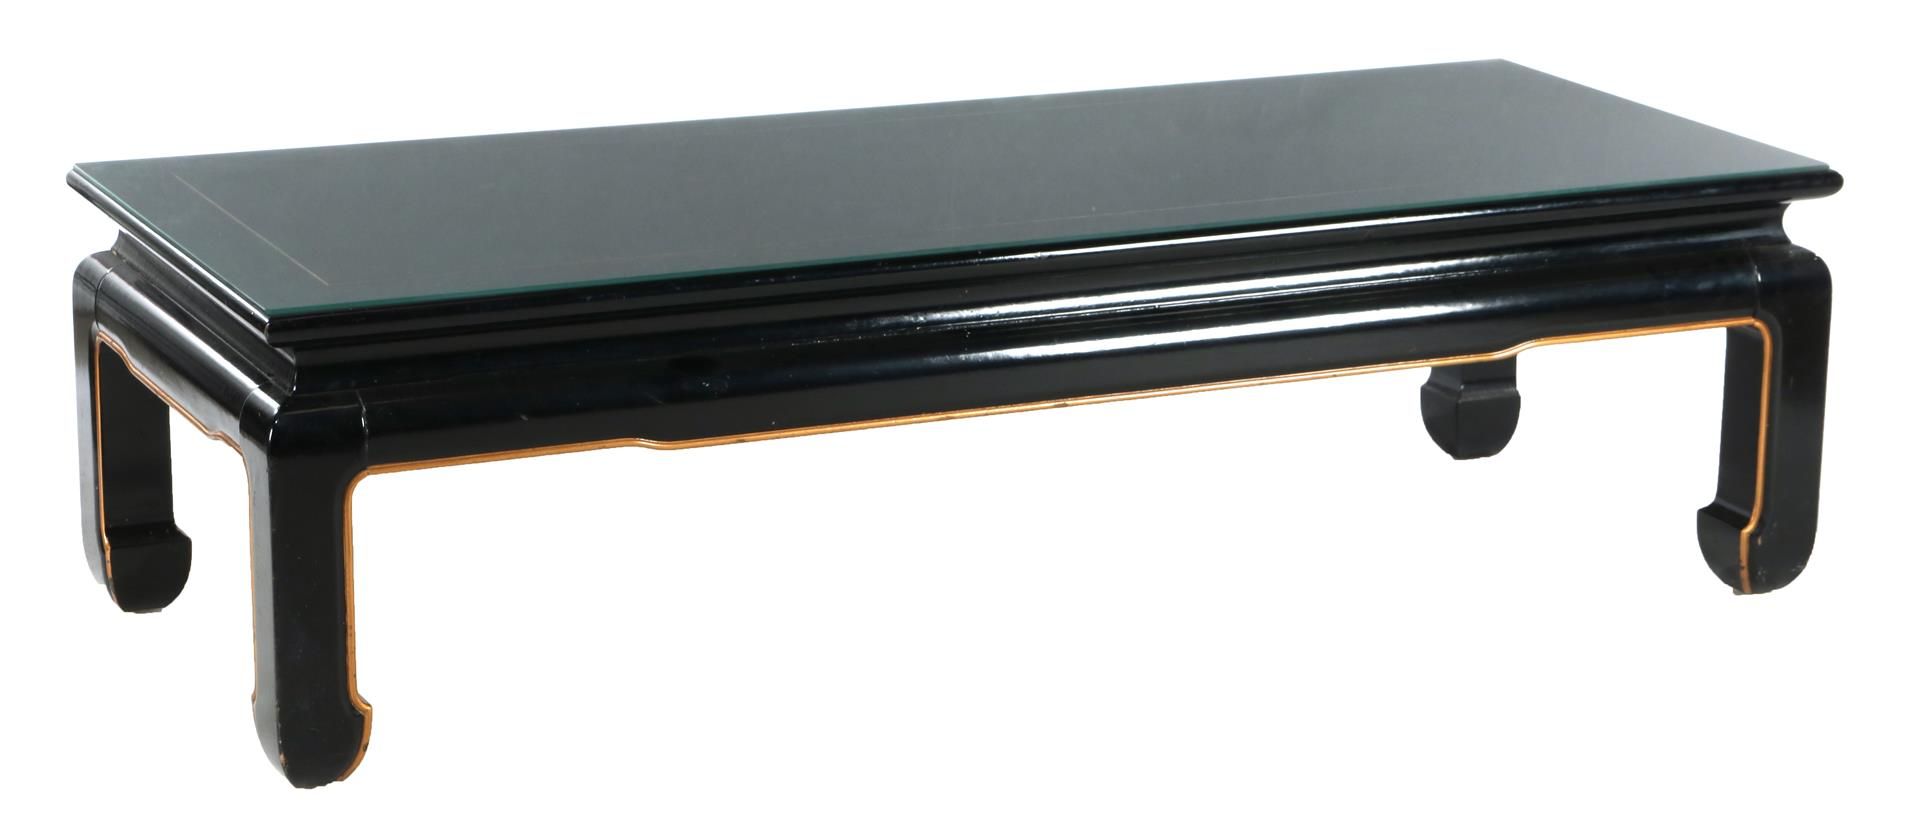 Null Black lacquered wooden coffee table, 41 cm high, top 152x60 cm